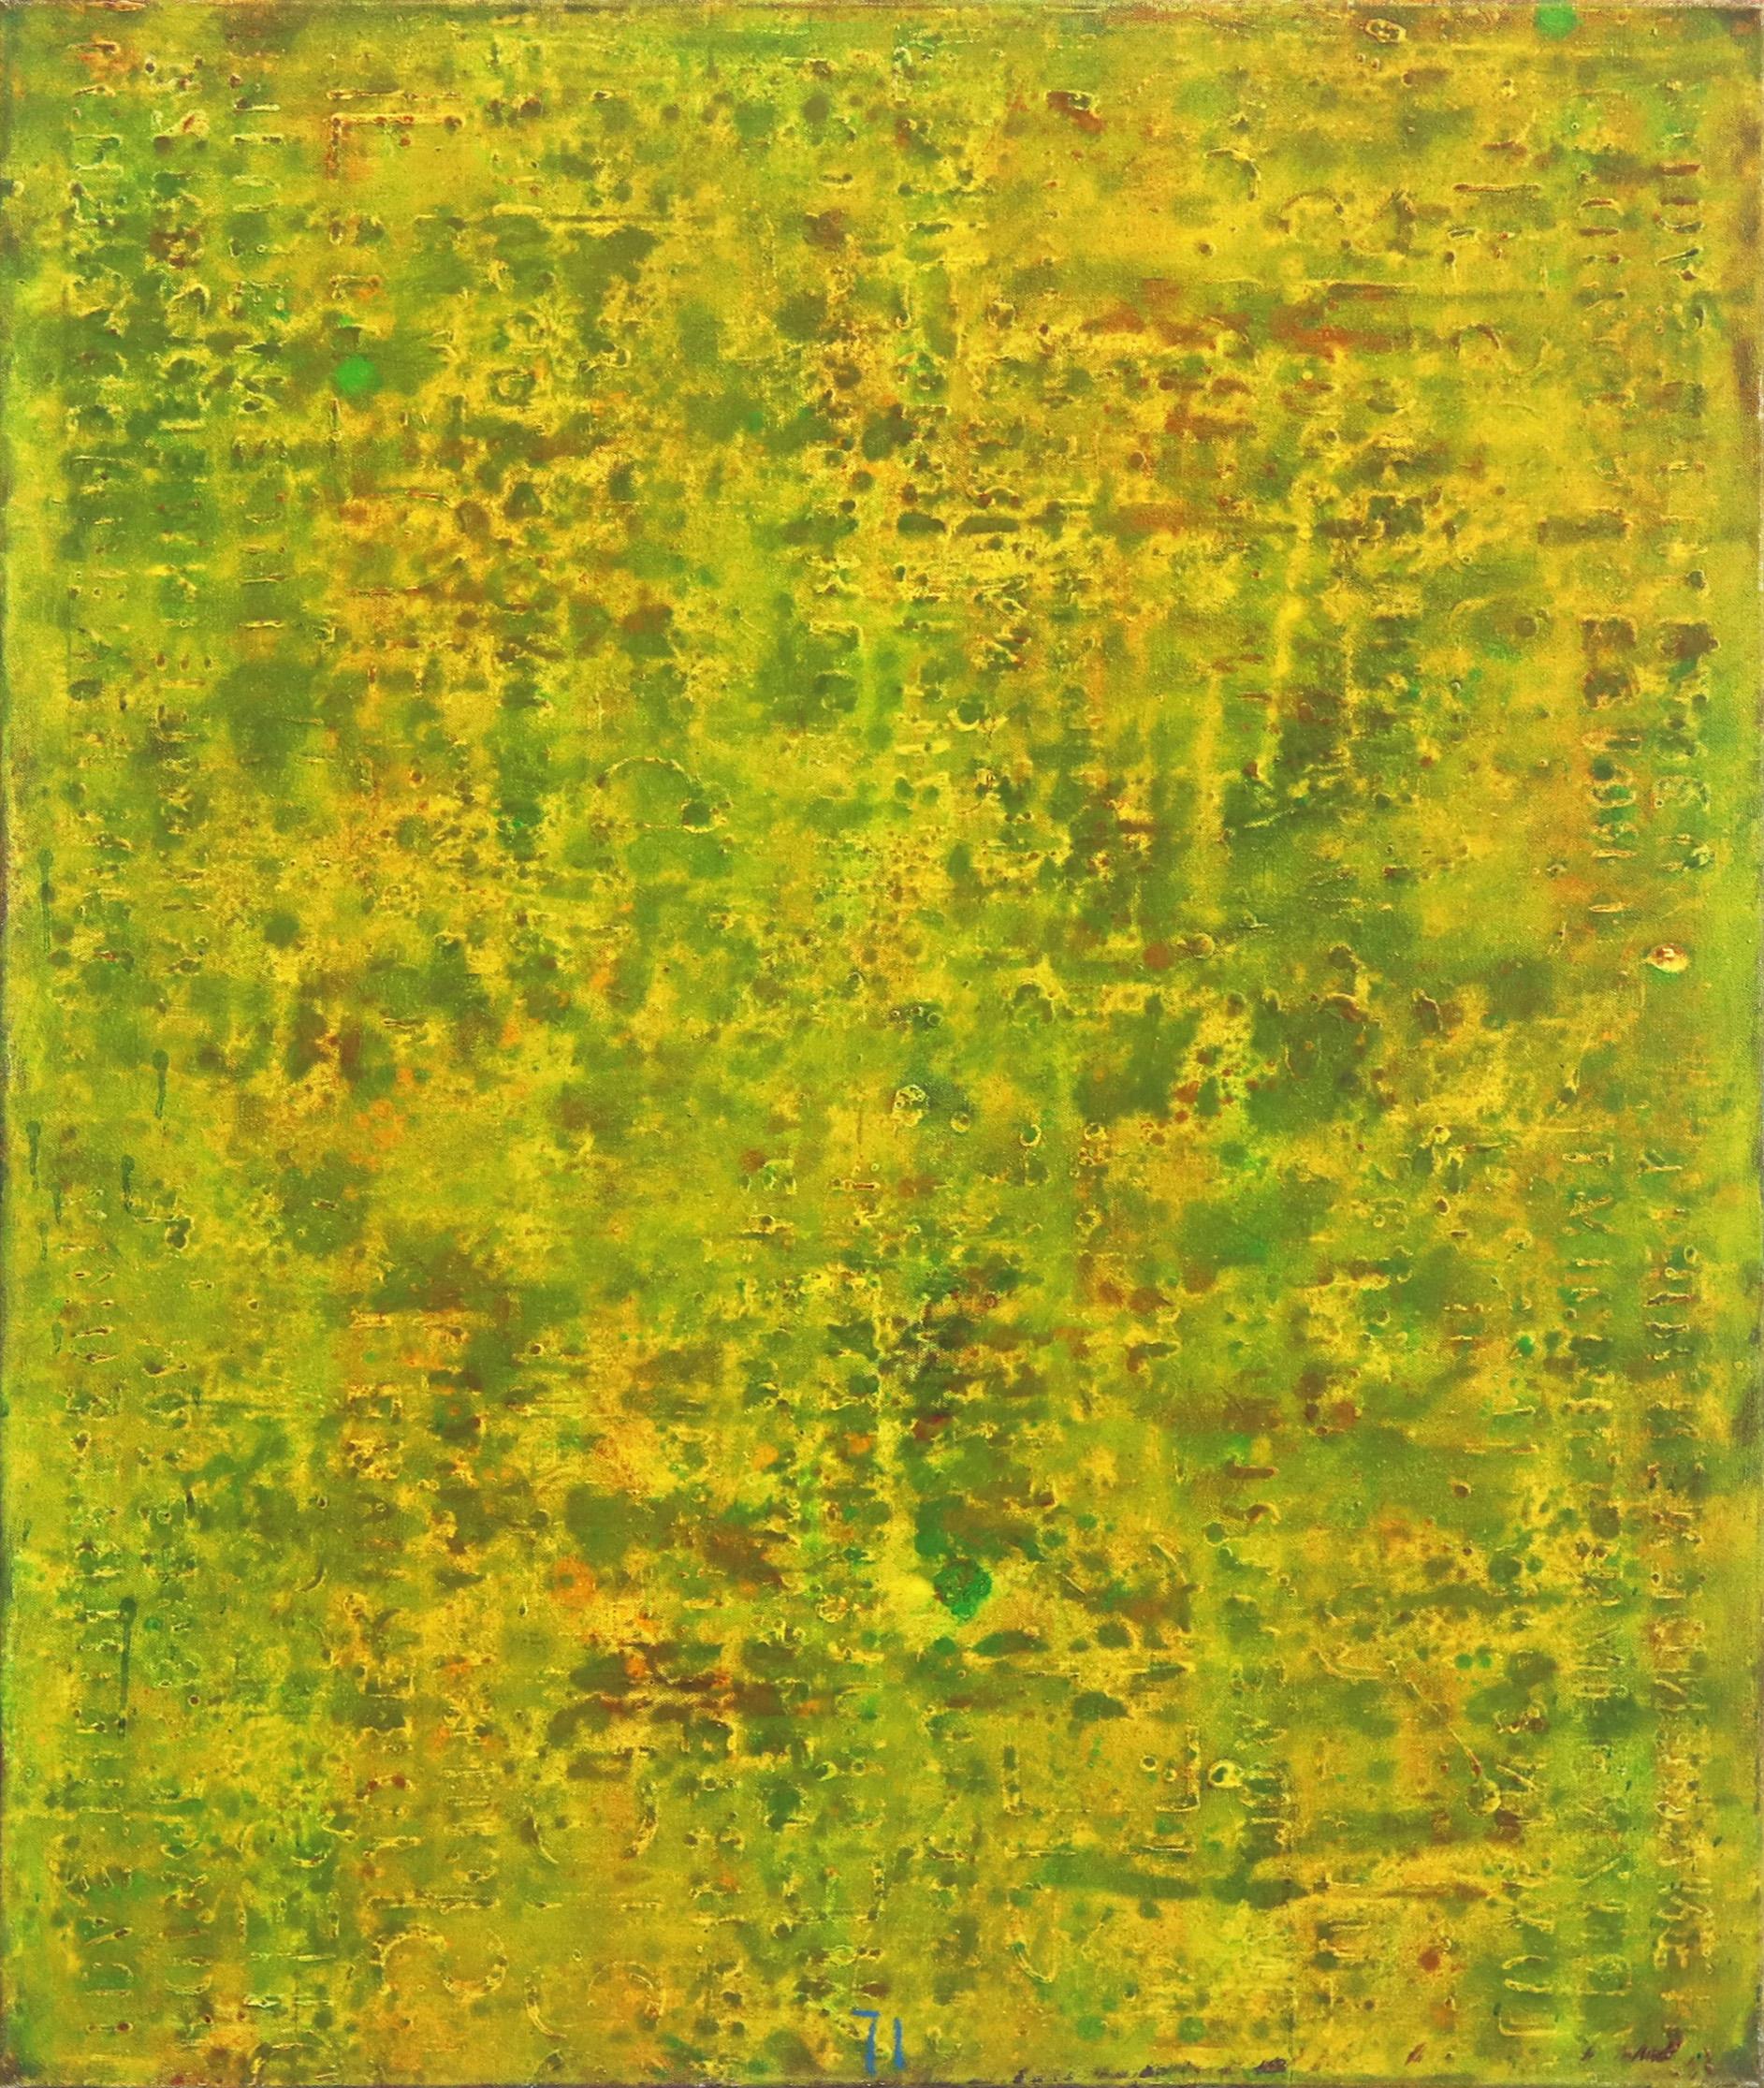 SE 33 - Original Abstract Expressionist Yellow Colorfield Oil Painting